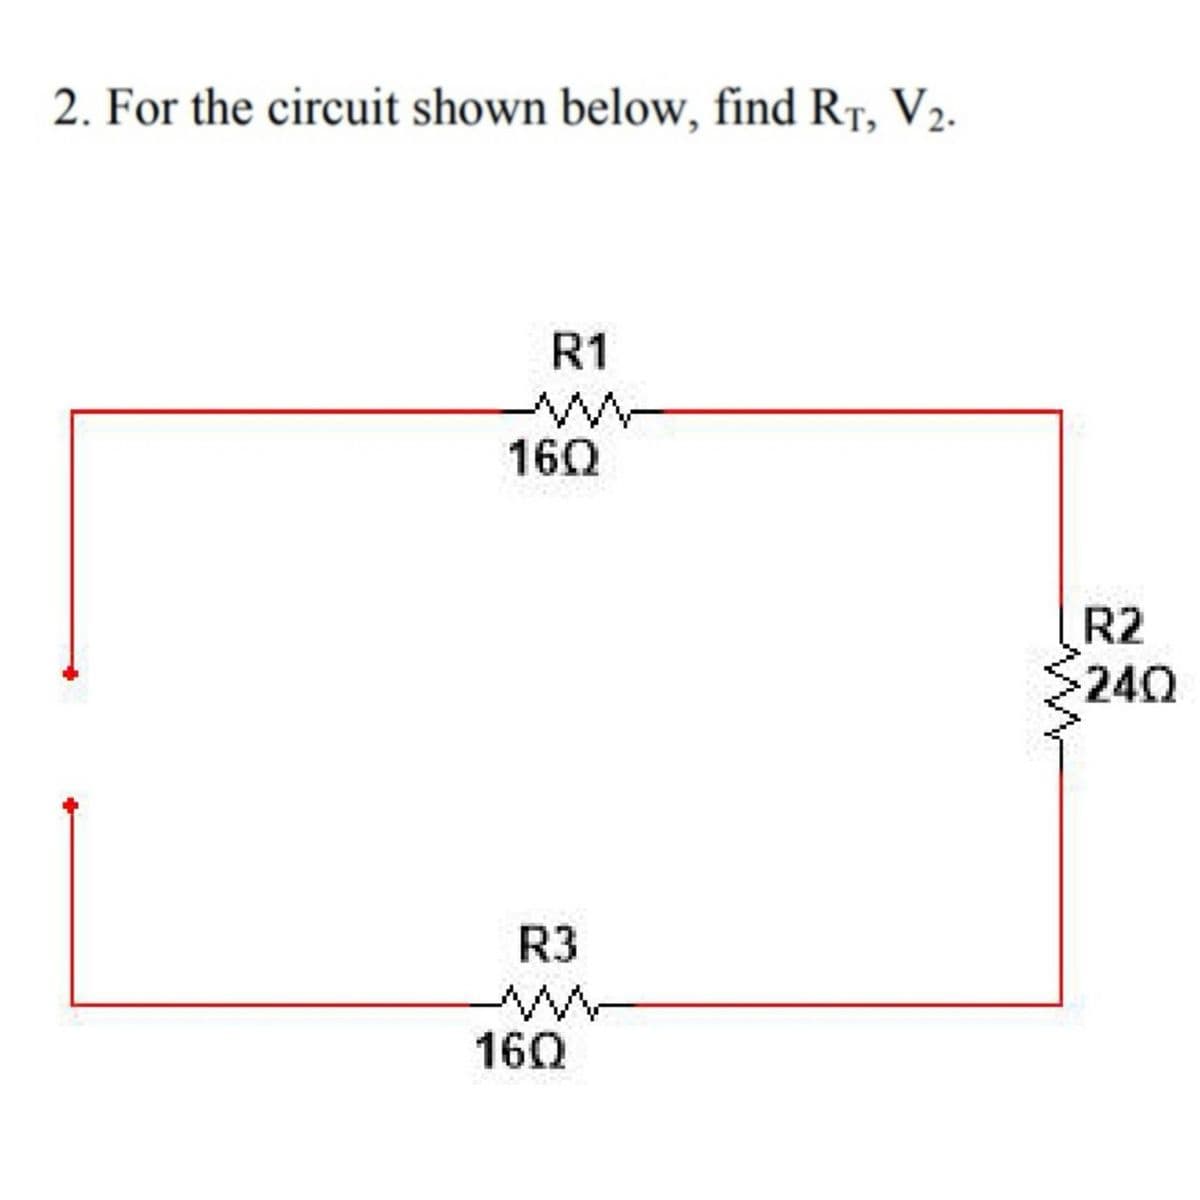 2. For the circuit shown below, find RT, V₂.
R1
160
R3
www
160
R2
-240